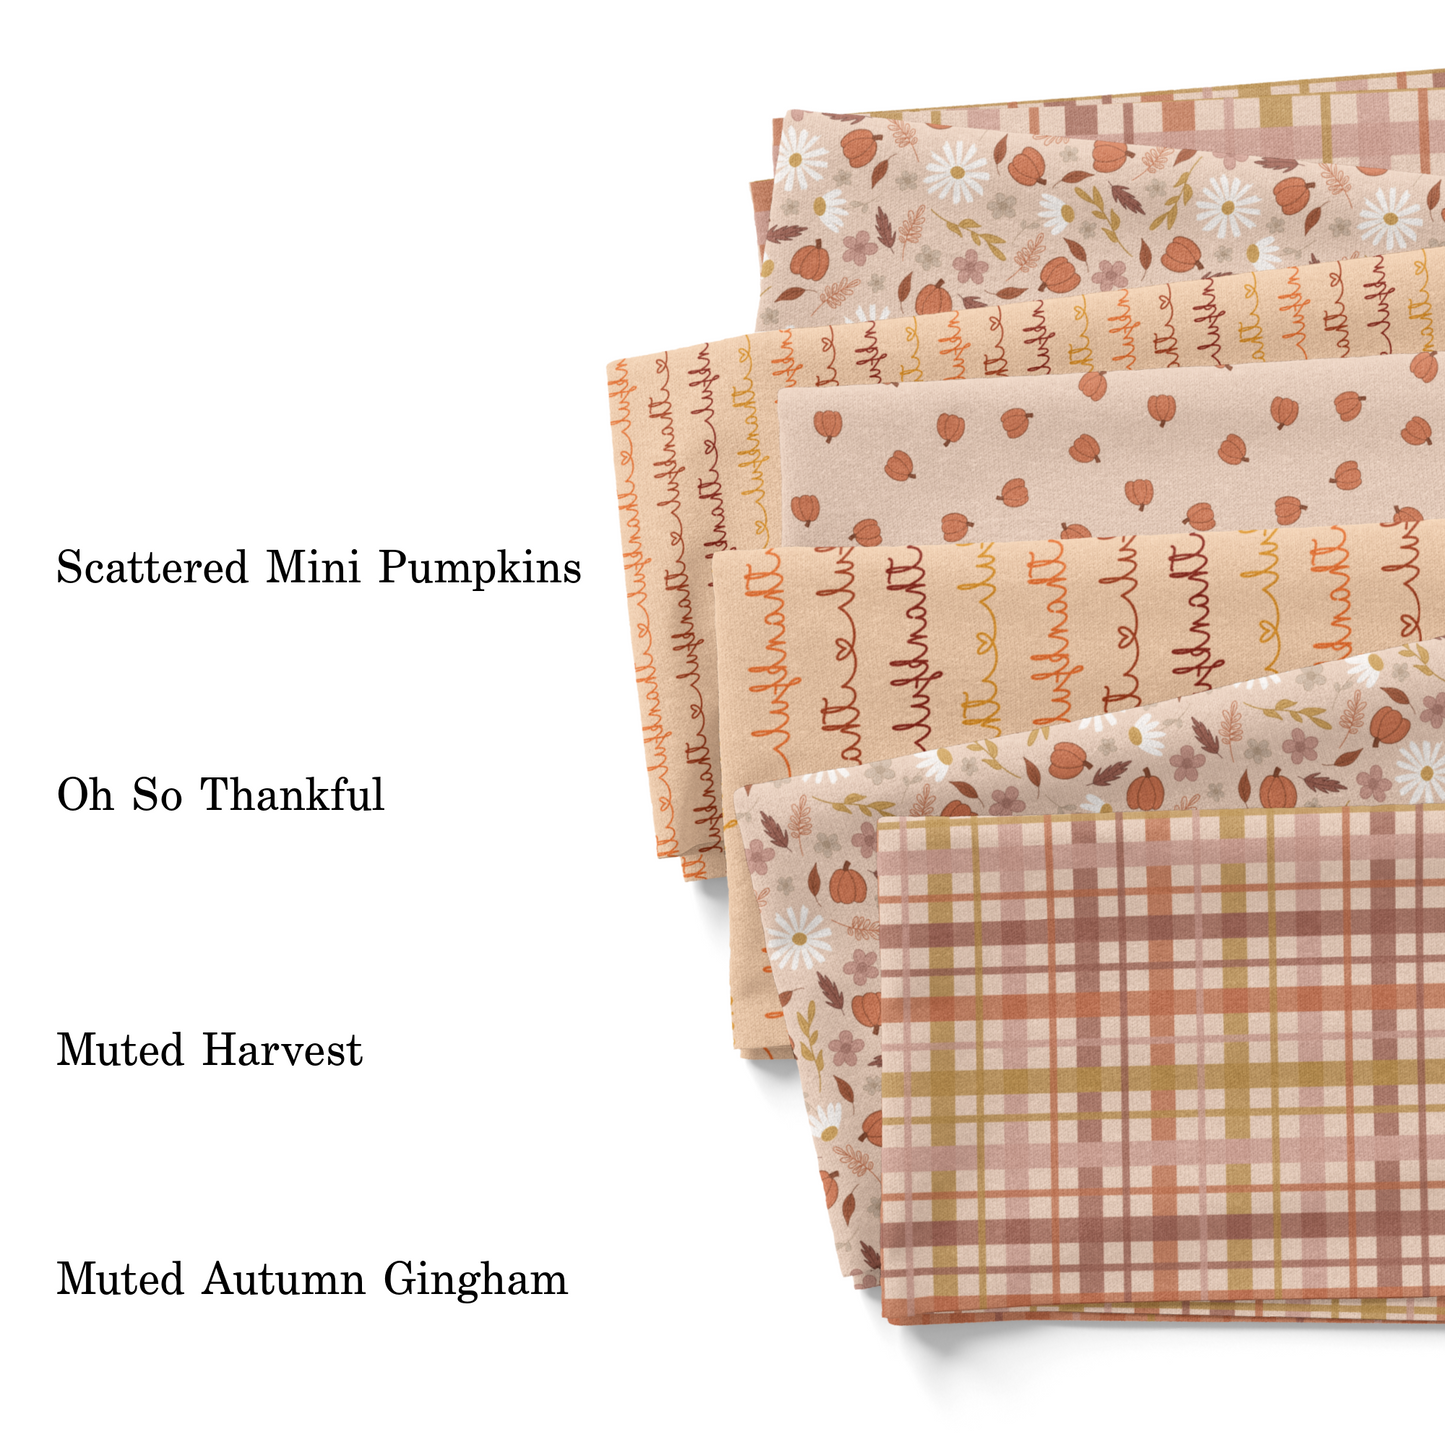 Wall Flower Graphics neutral fall season fabric swatches.